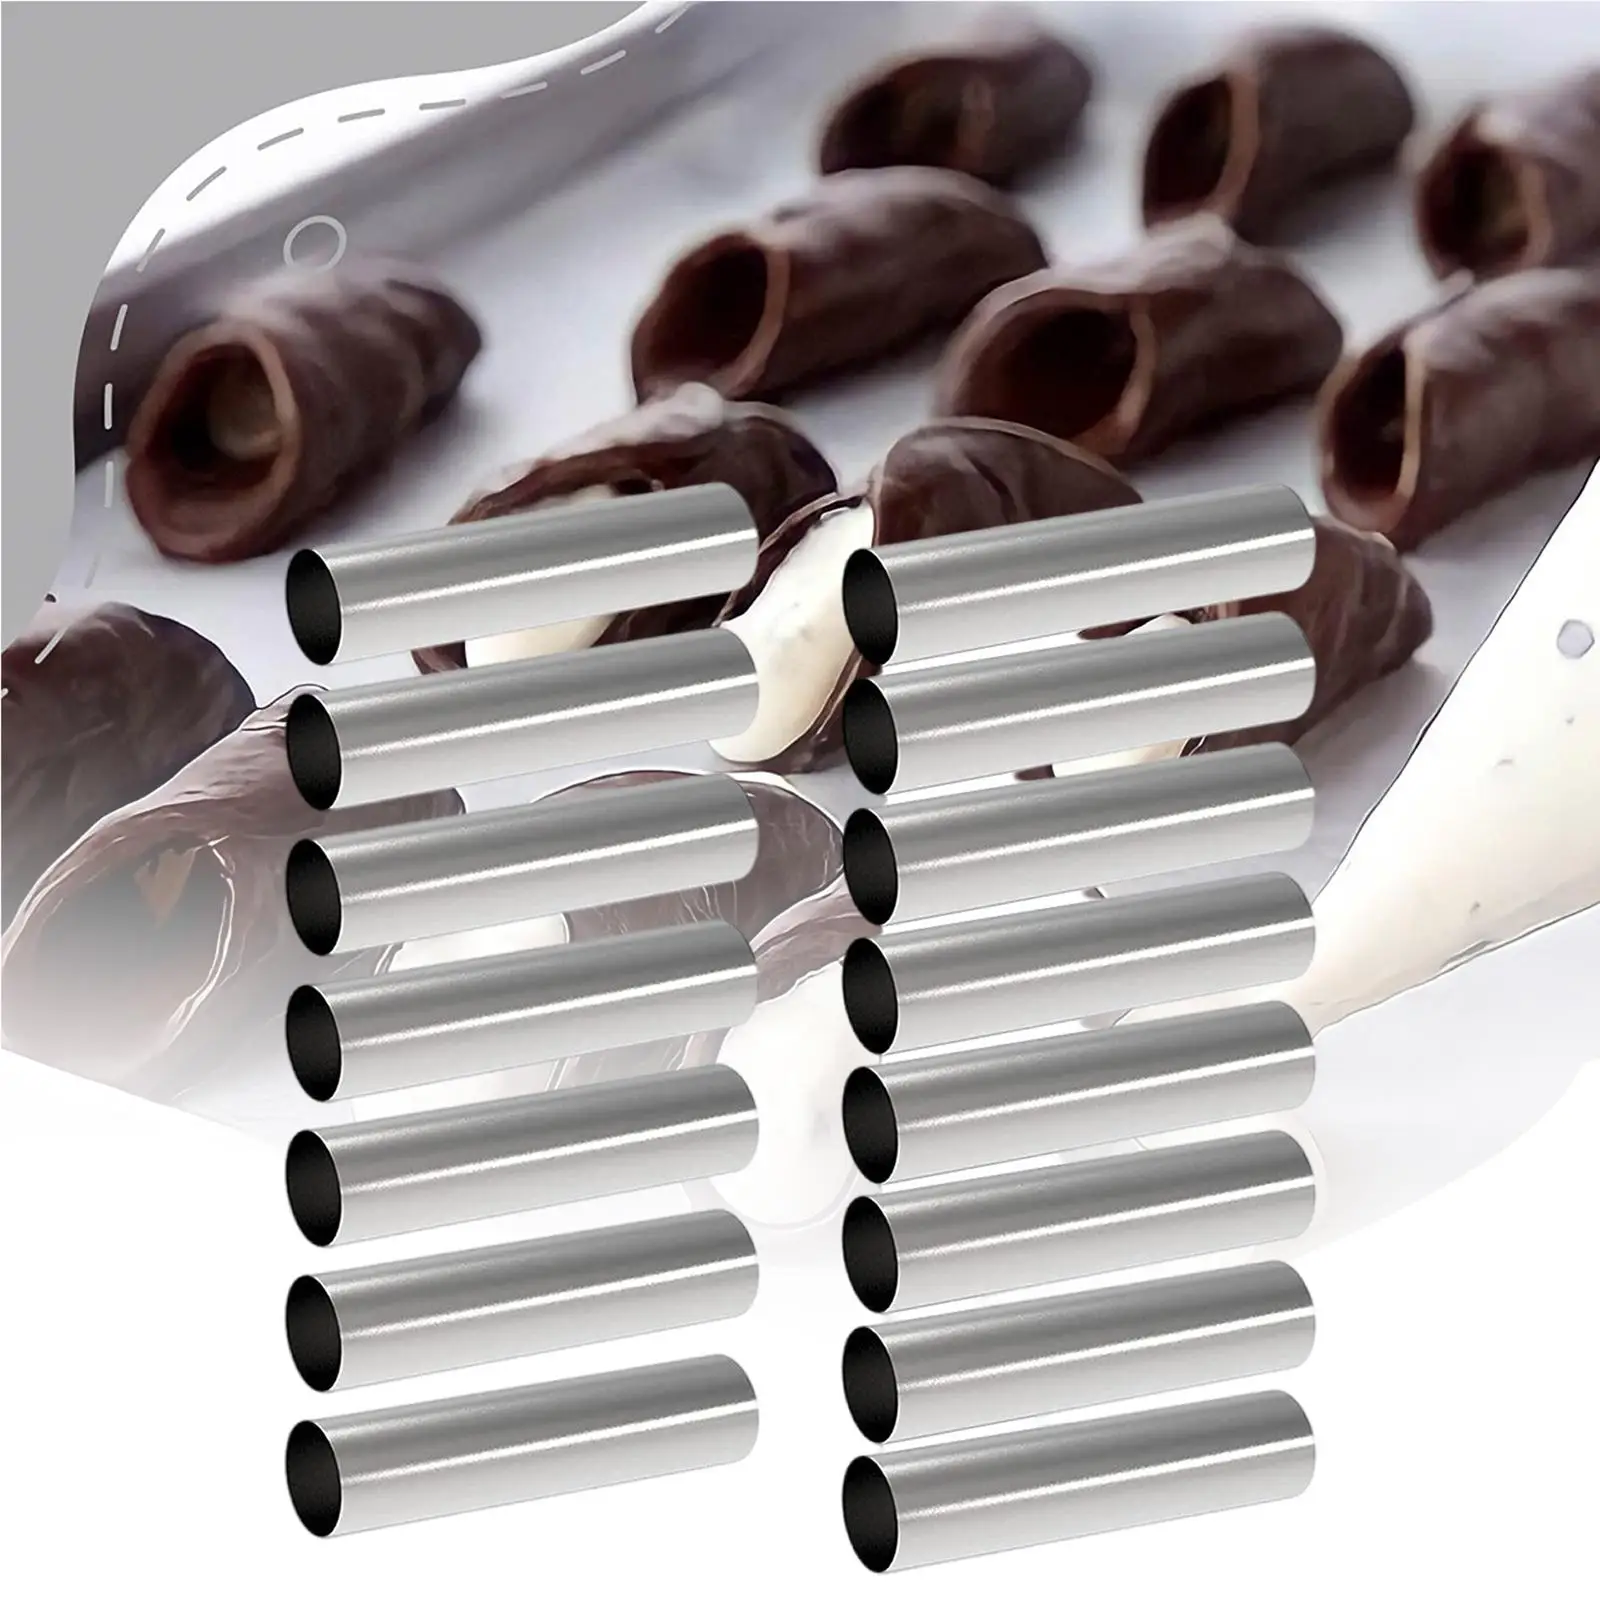 15 Pieces Cannoli Form Tubes Cannoli Tubes Shells for Ice Cream Cones Pastry